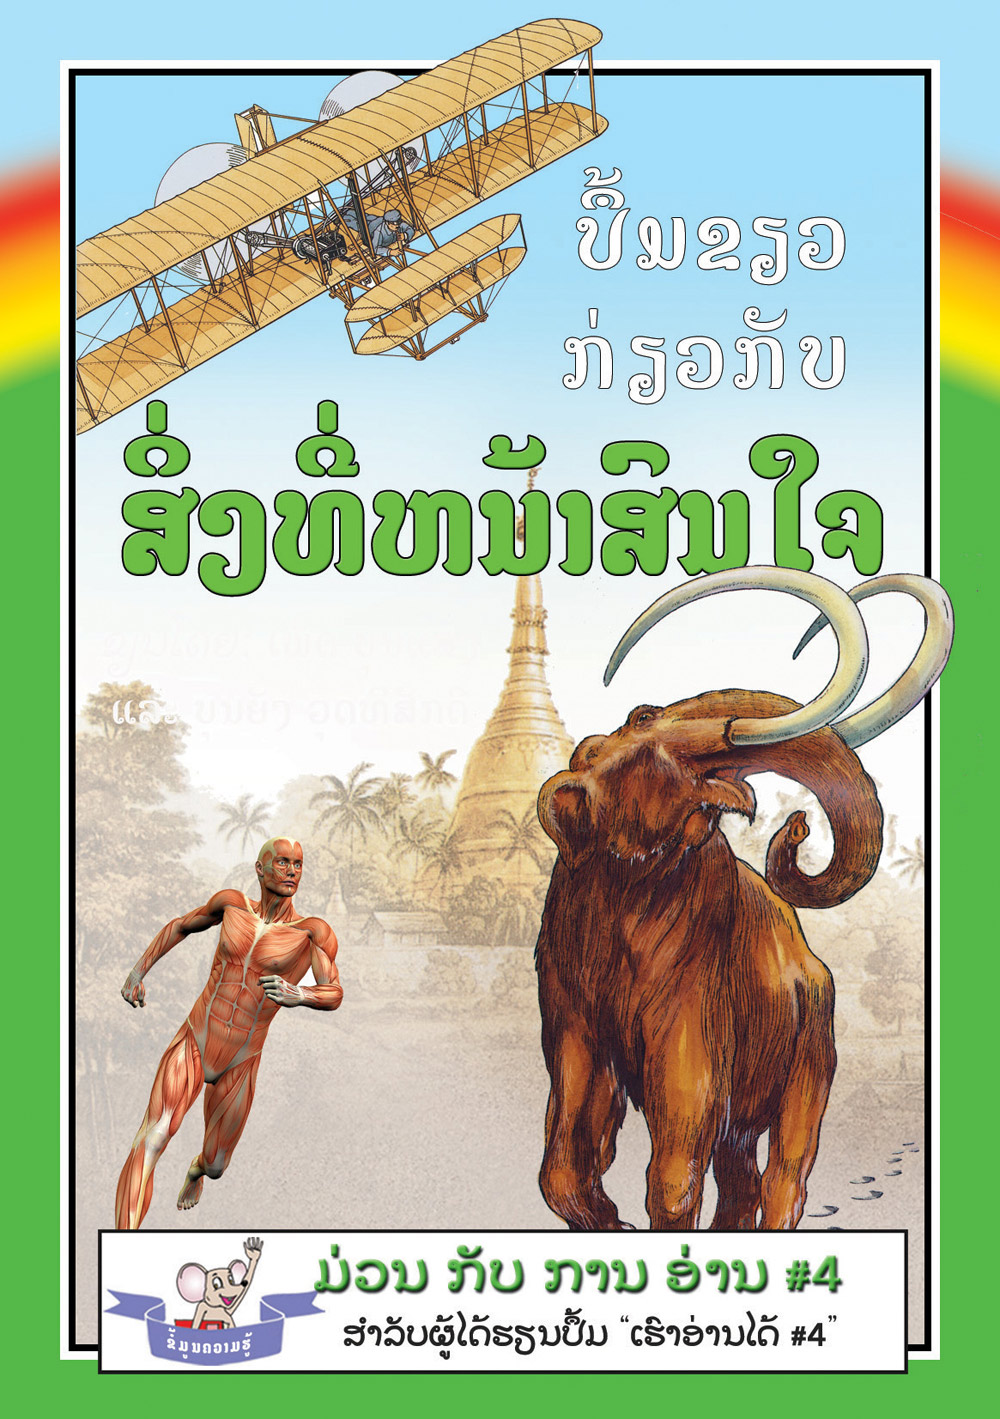 The Green Book of Interesting Facts large book cover, published in Lao language